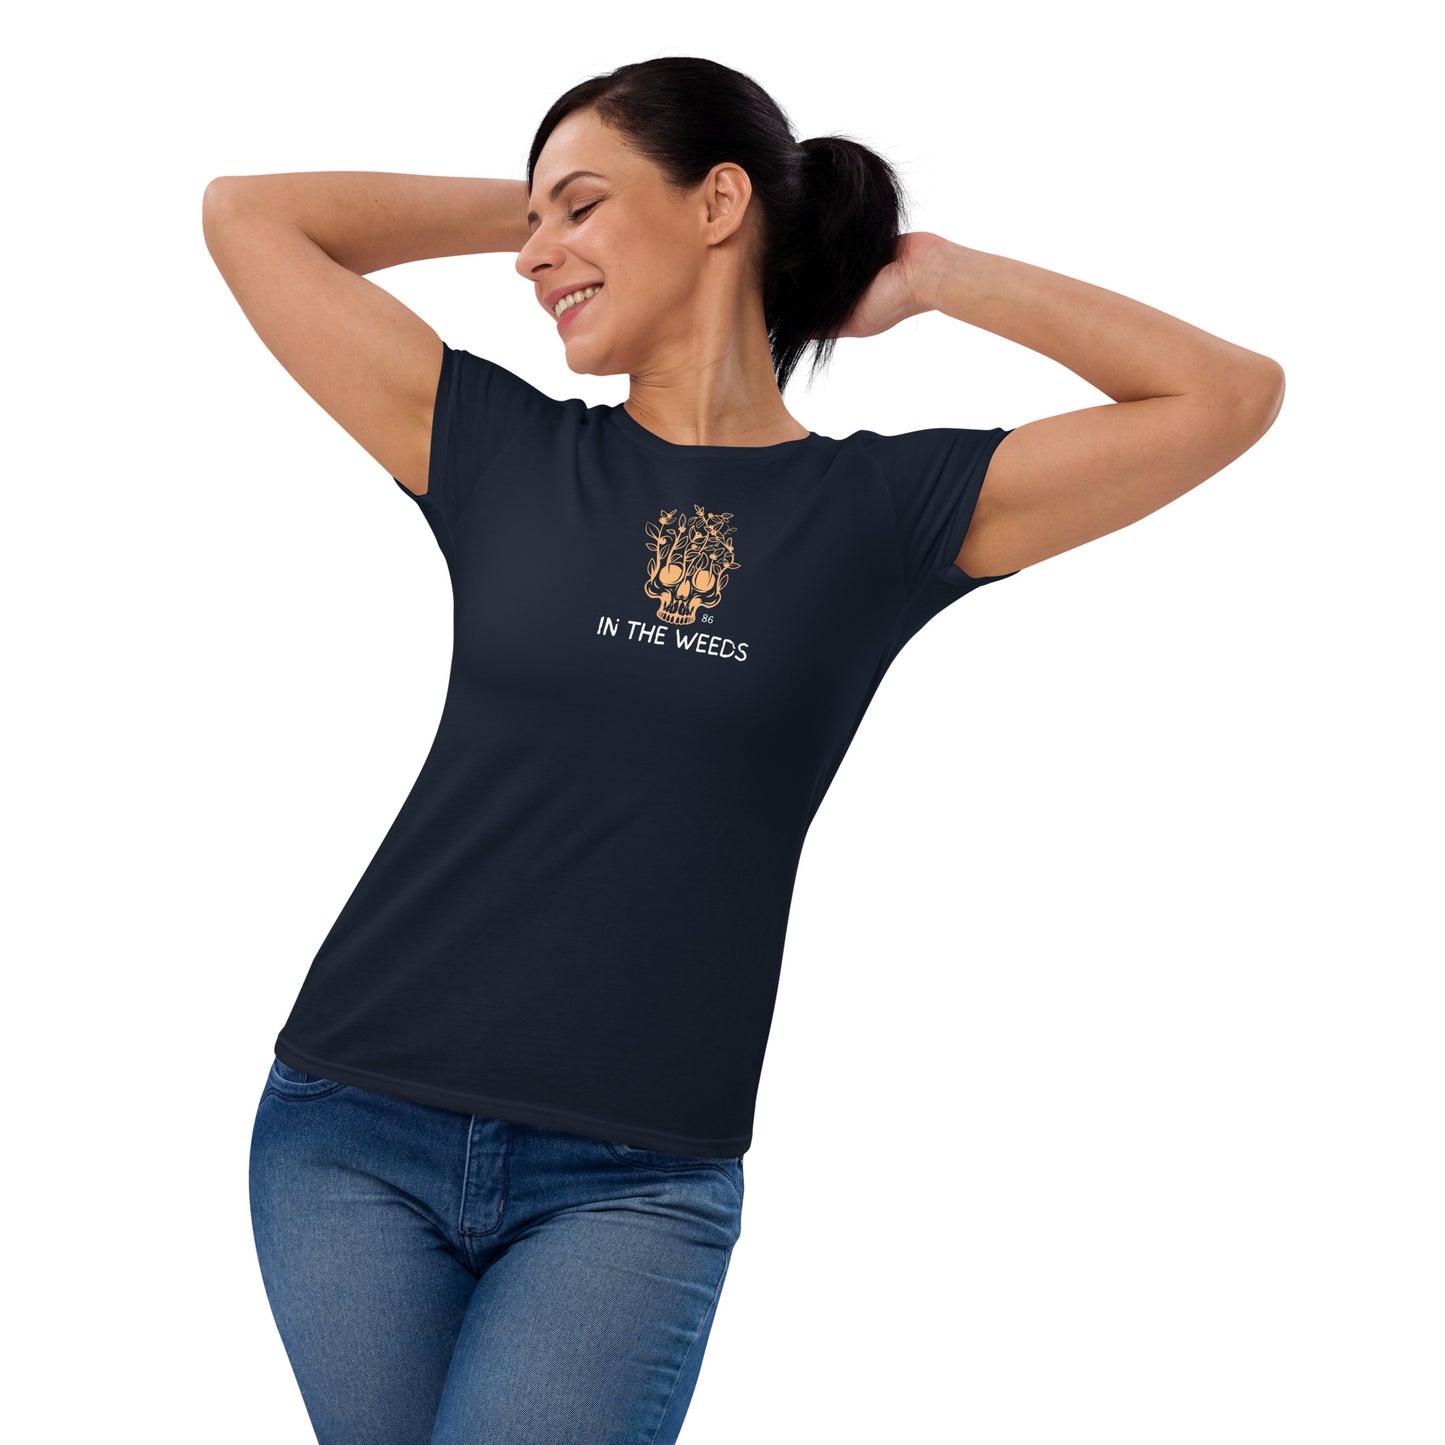 IN THE WEEDS 1 BLACK Women's short sleeve t-shirt